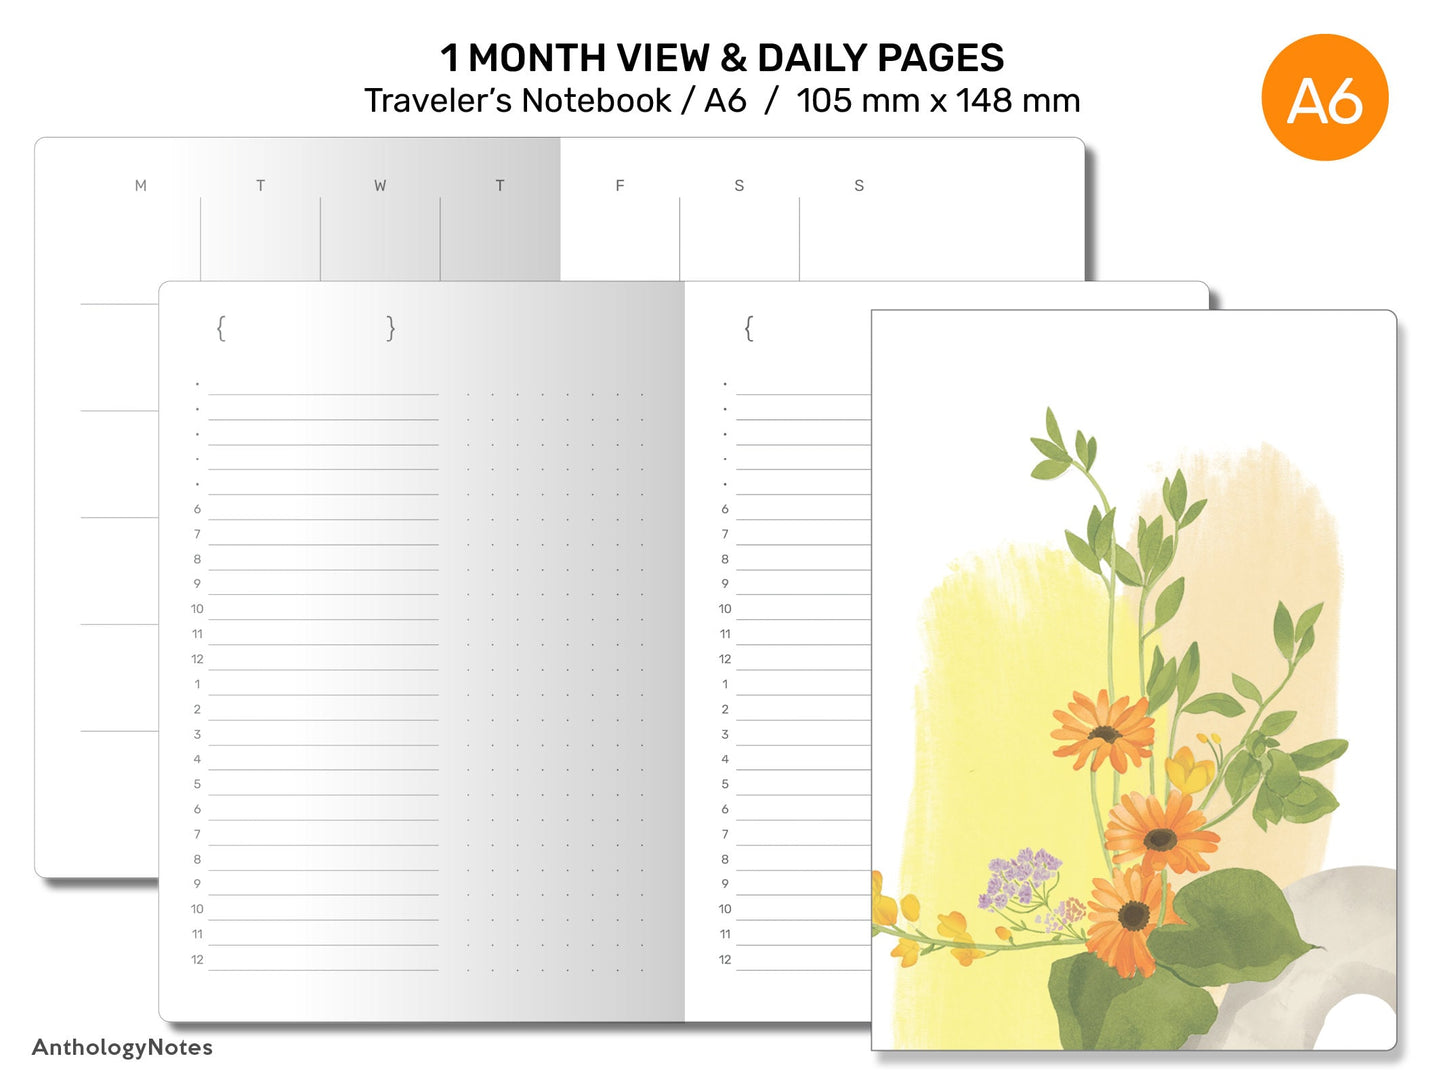 A6 TN Monthly Daily Schedule Mix - Minimalist & Functional Midori Inspired Traveler's Notebook Printable Refill Insert